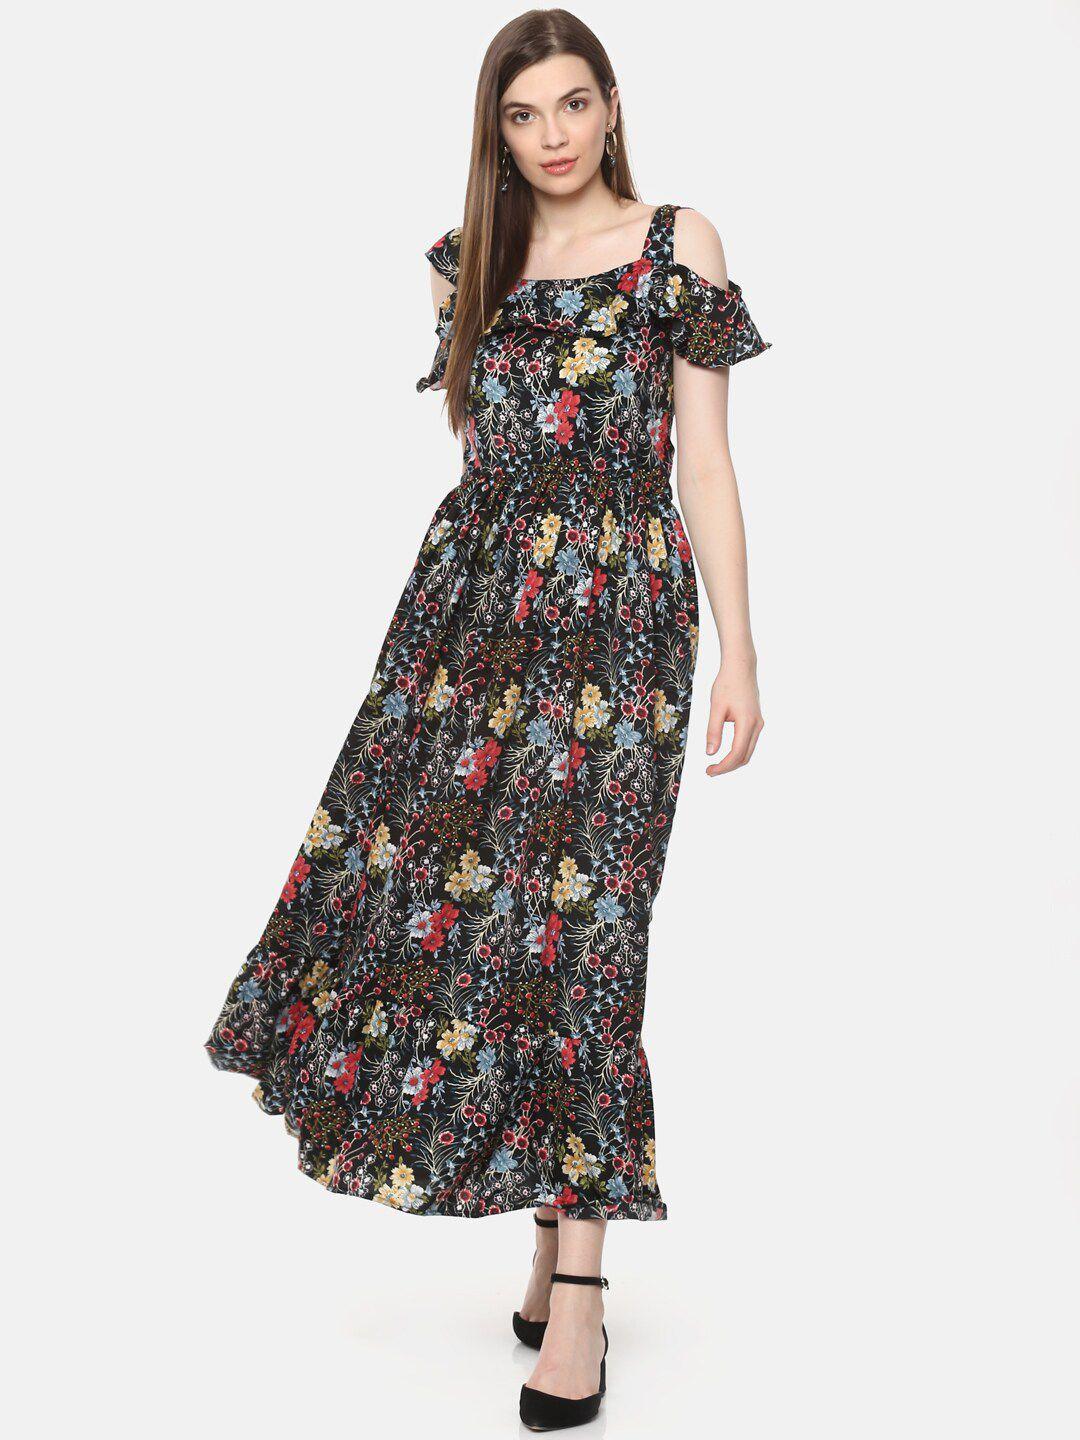 BAESD Floral Printed Square Neck Ruffles Detailed Fit & Flare Midi Dress